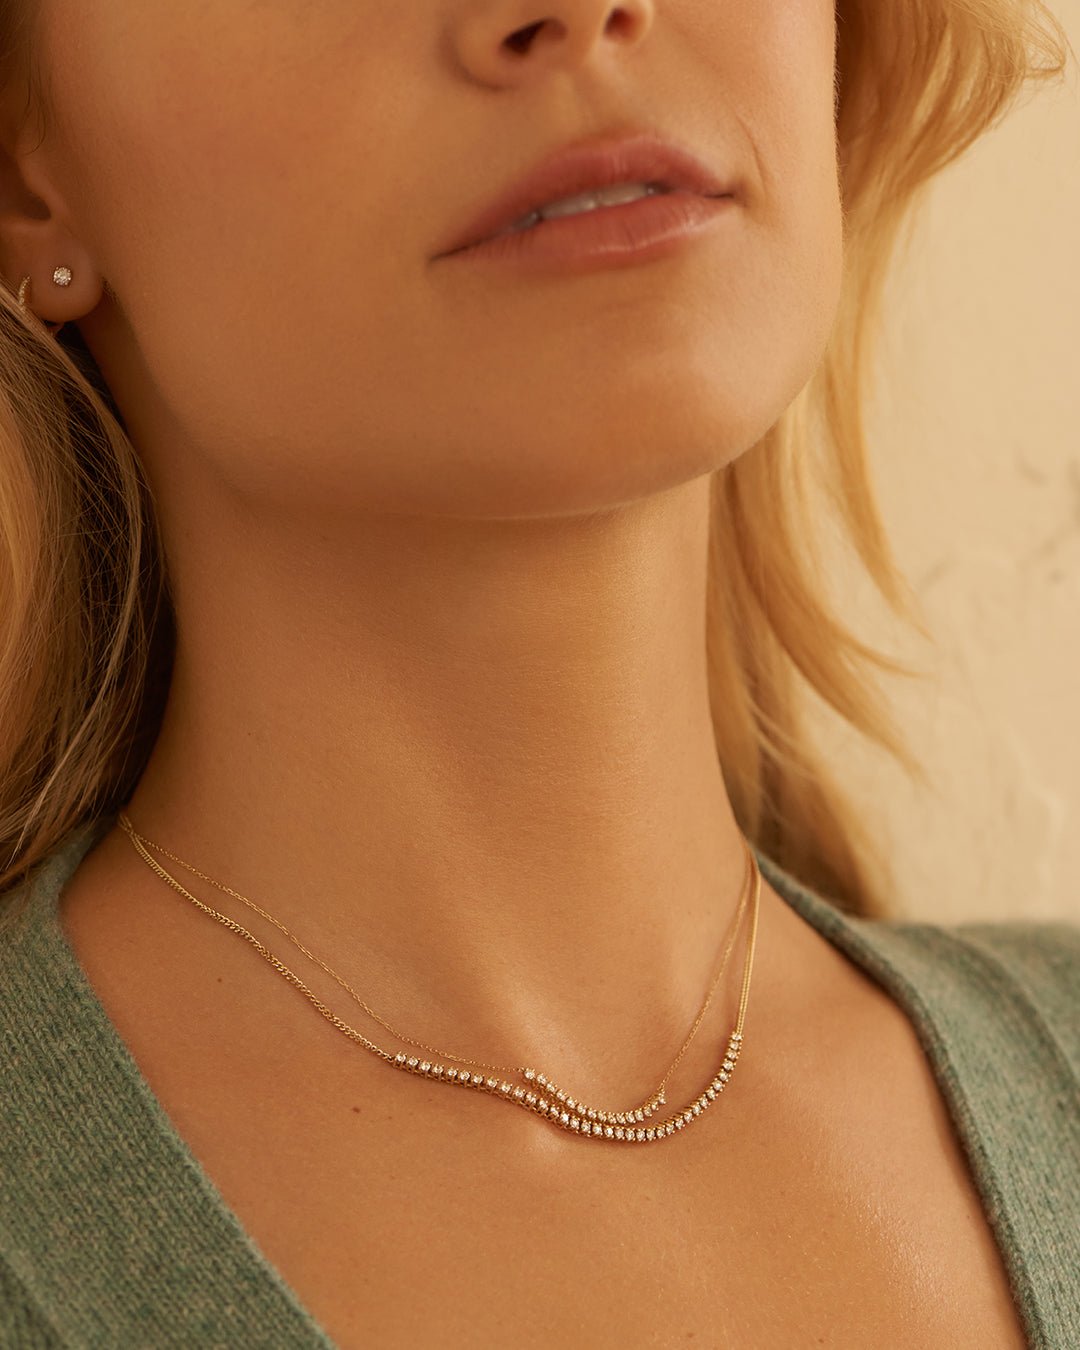 Woman wearing diamond necklaces.